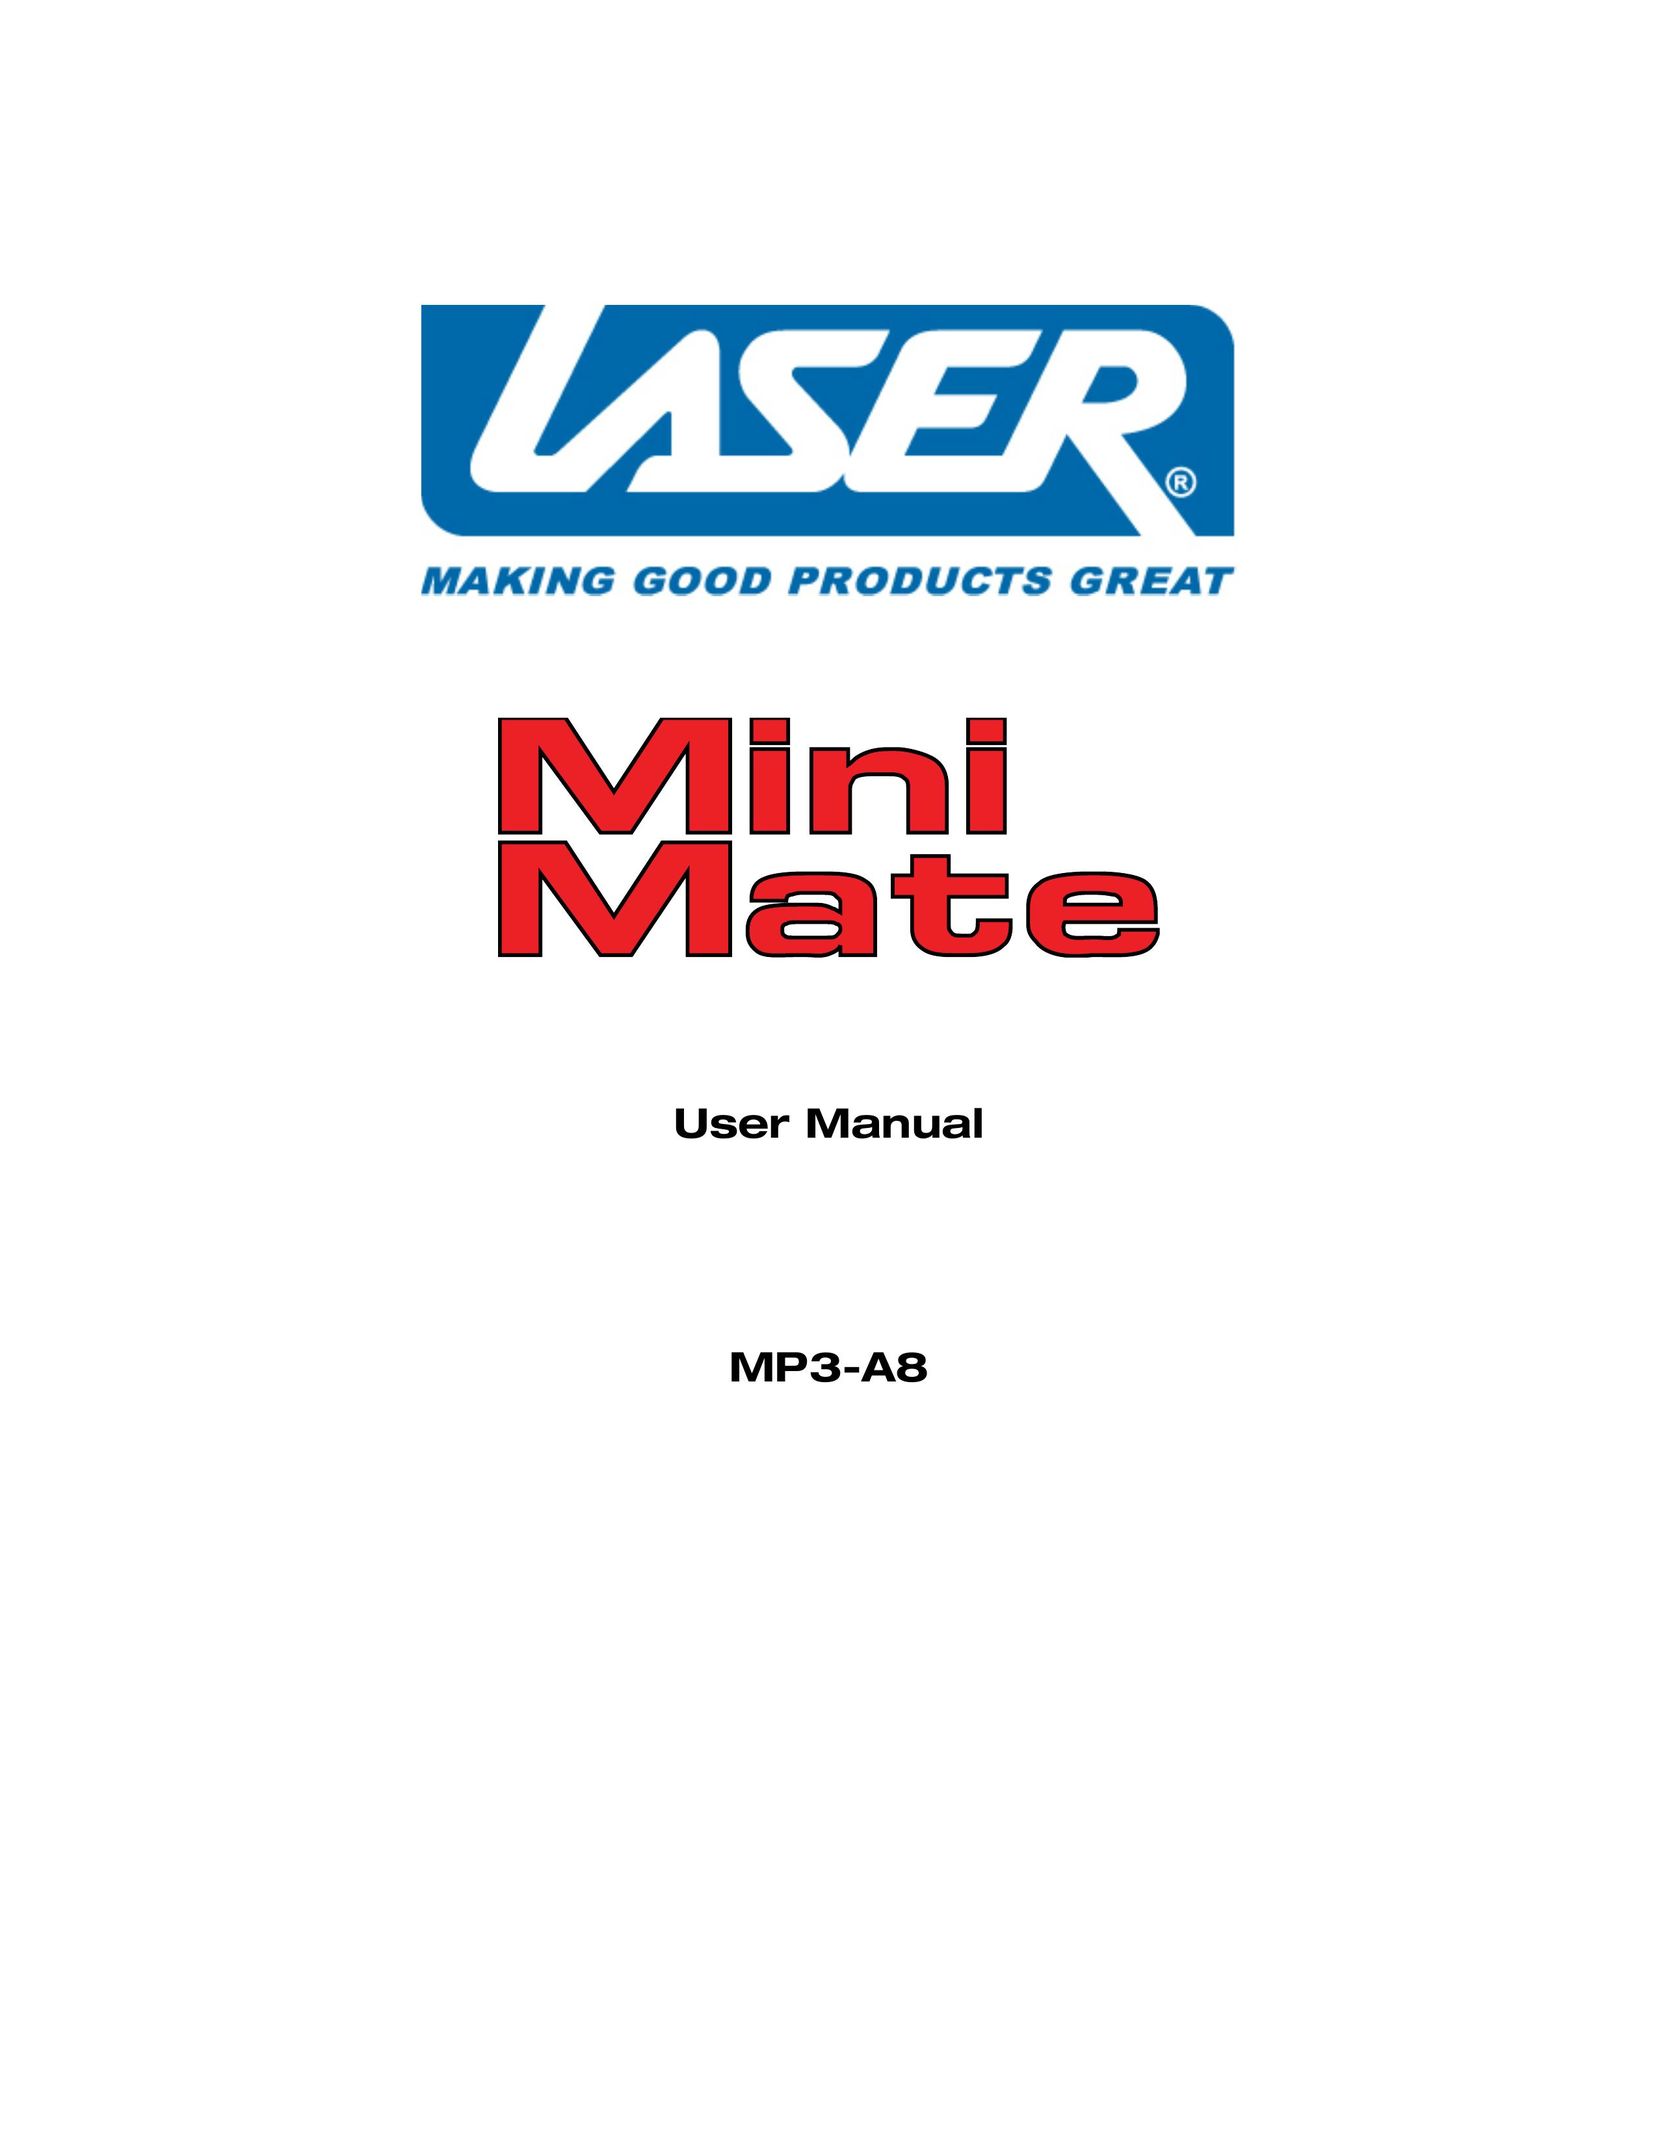 Laser MP3-A8 MP3 Player User Manual